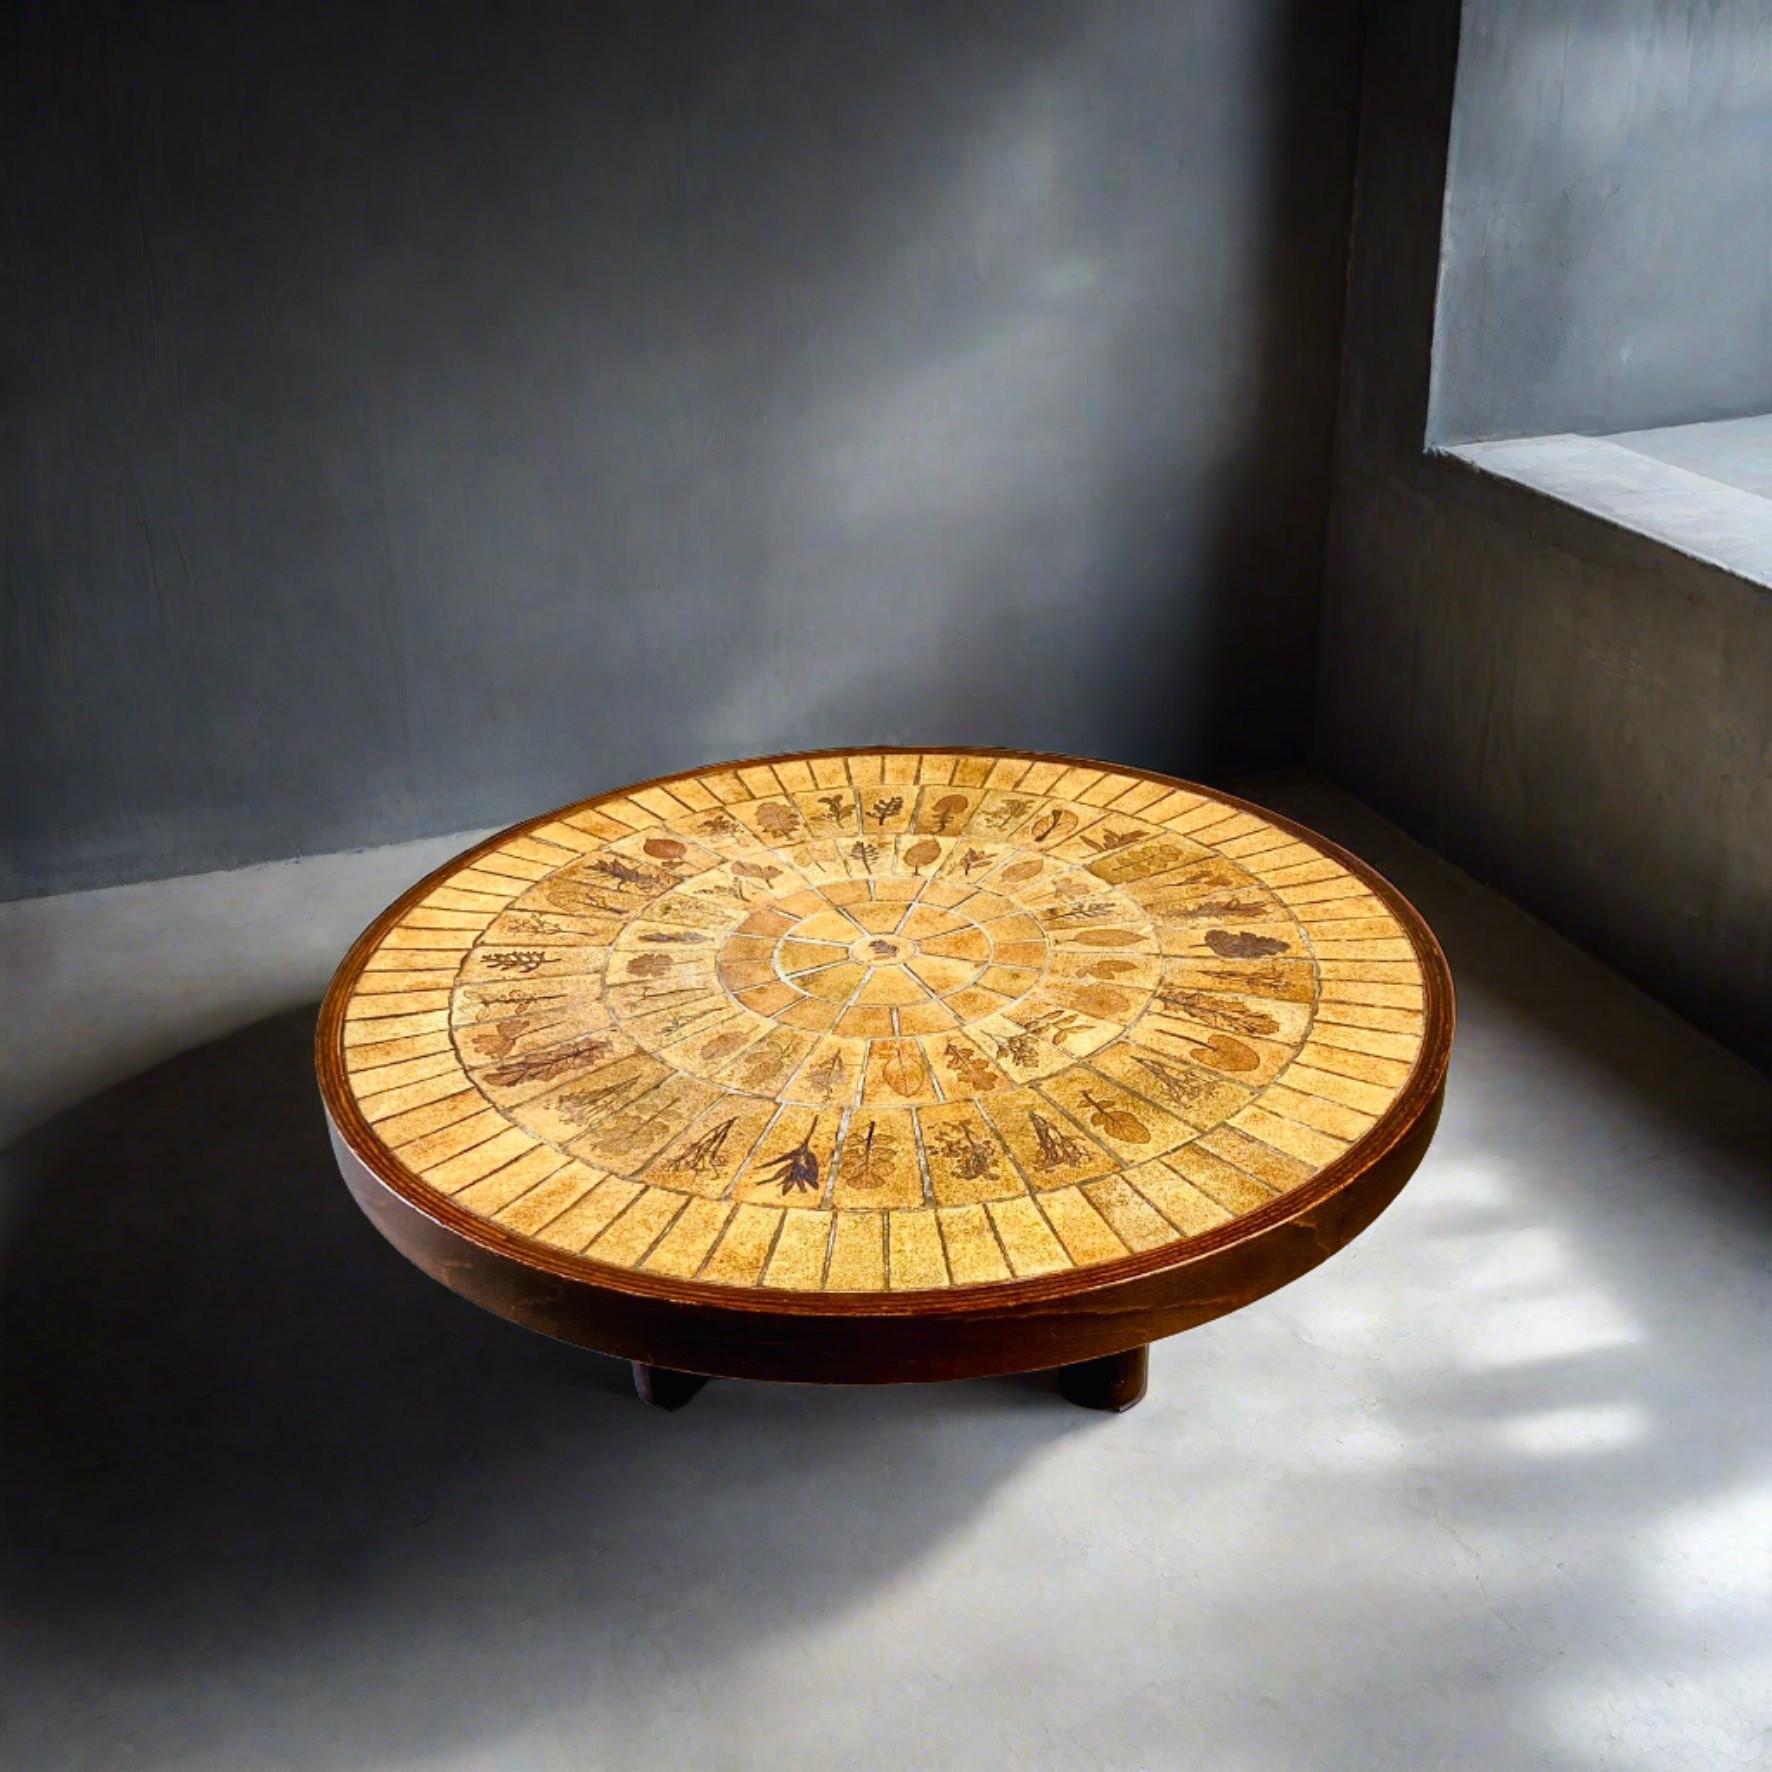 Round Brutalist Ceramic Coffee Table by Roger Capron, France 1960

Elevate your living space with the exquisite Round Brutalist Coffee Table, the epitome of mid-century charm and artisanal craftsmanship. Crafted by the visionary Roger Capron,